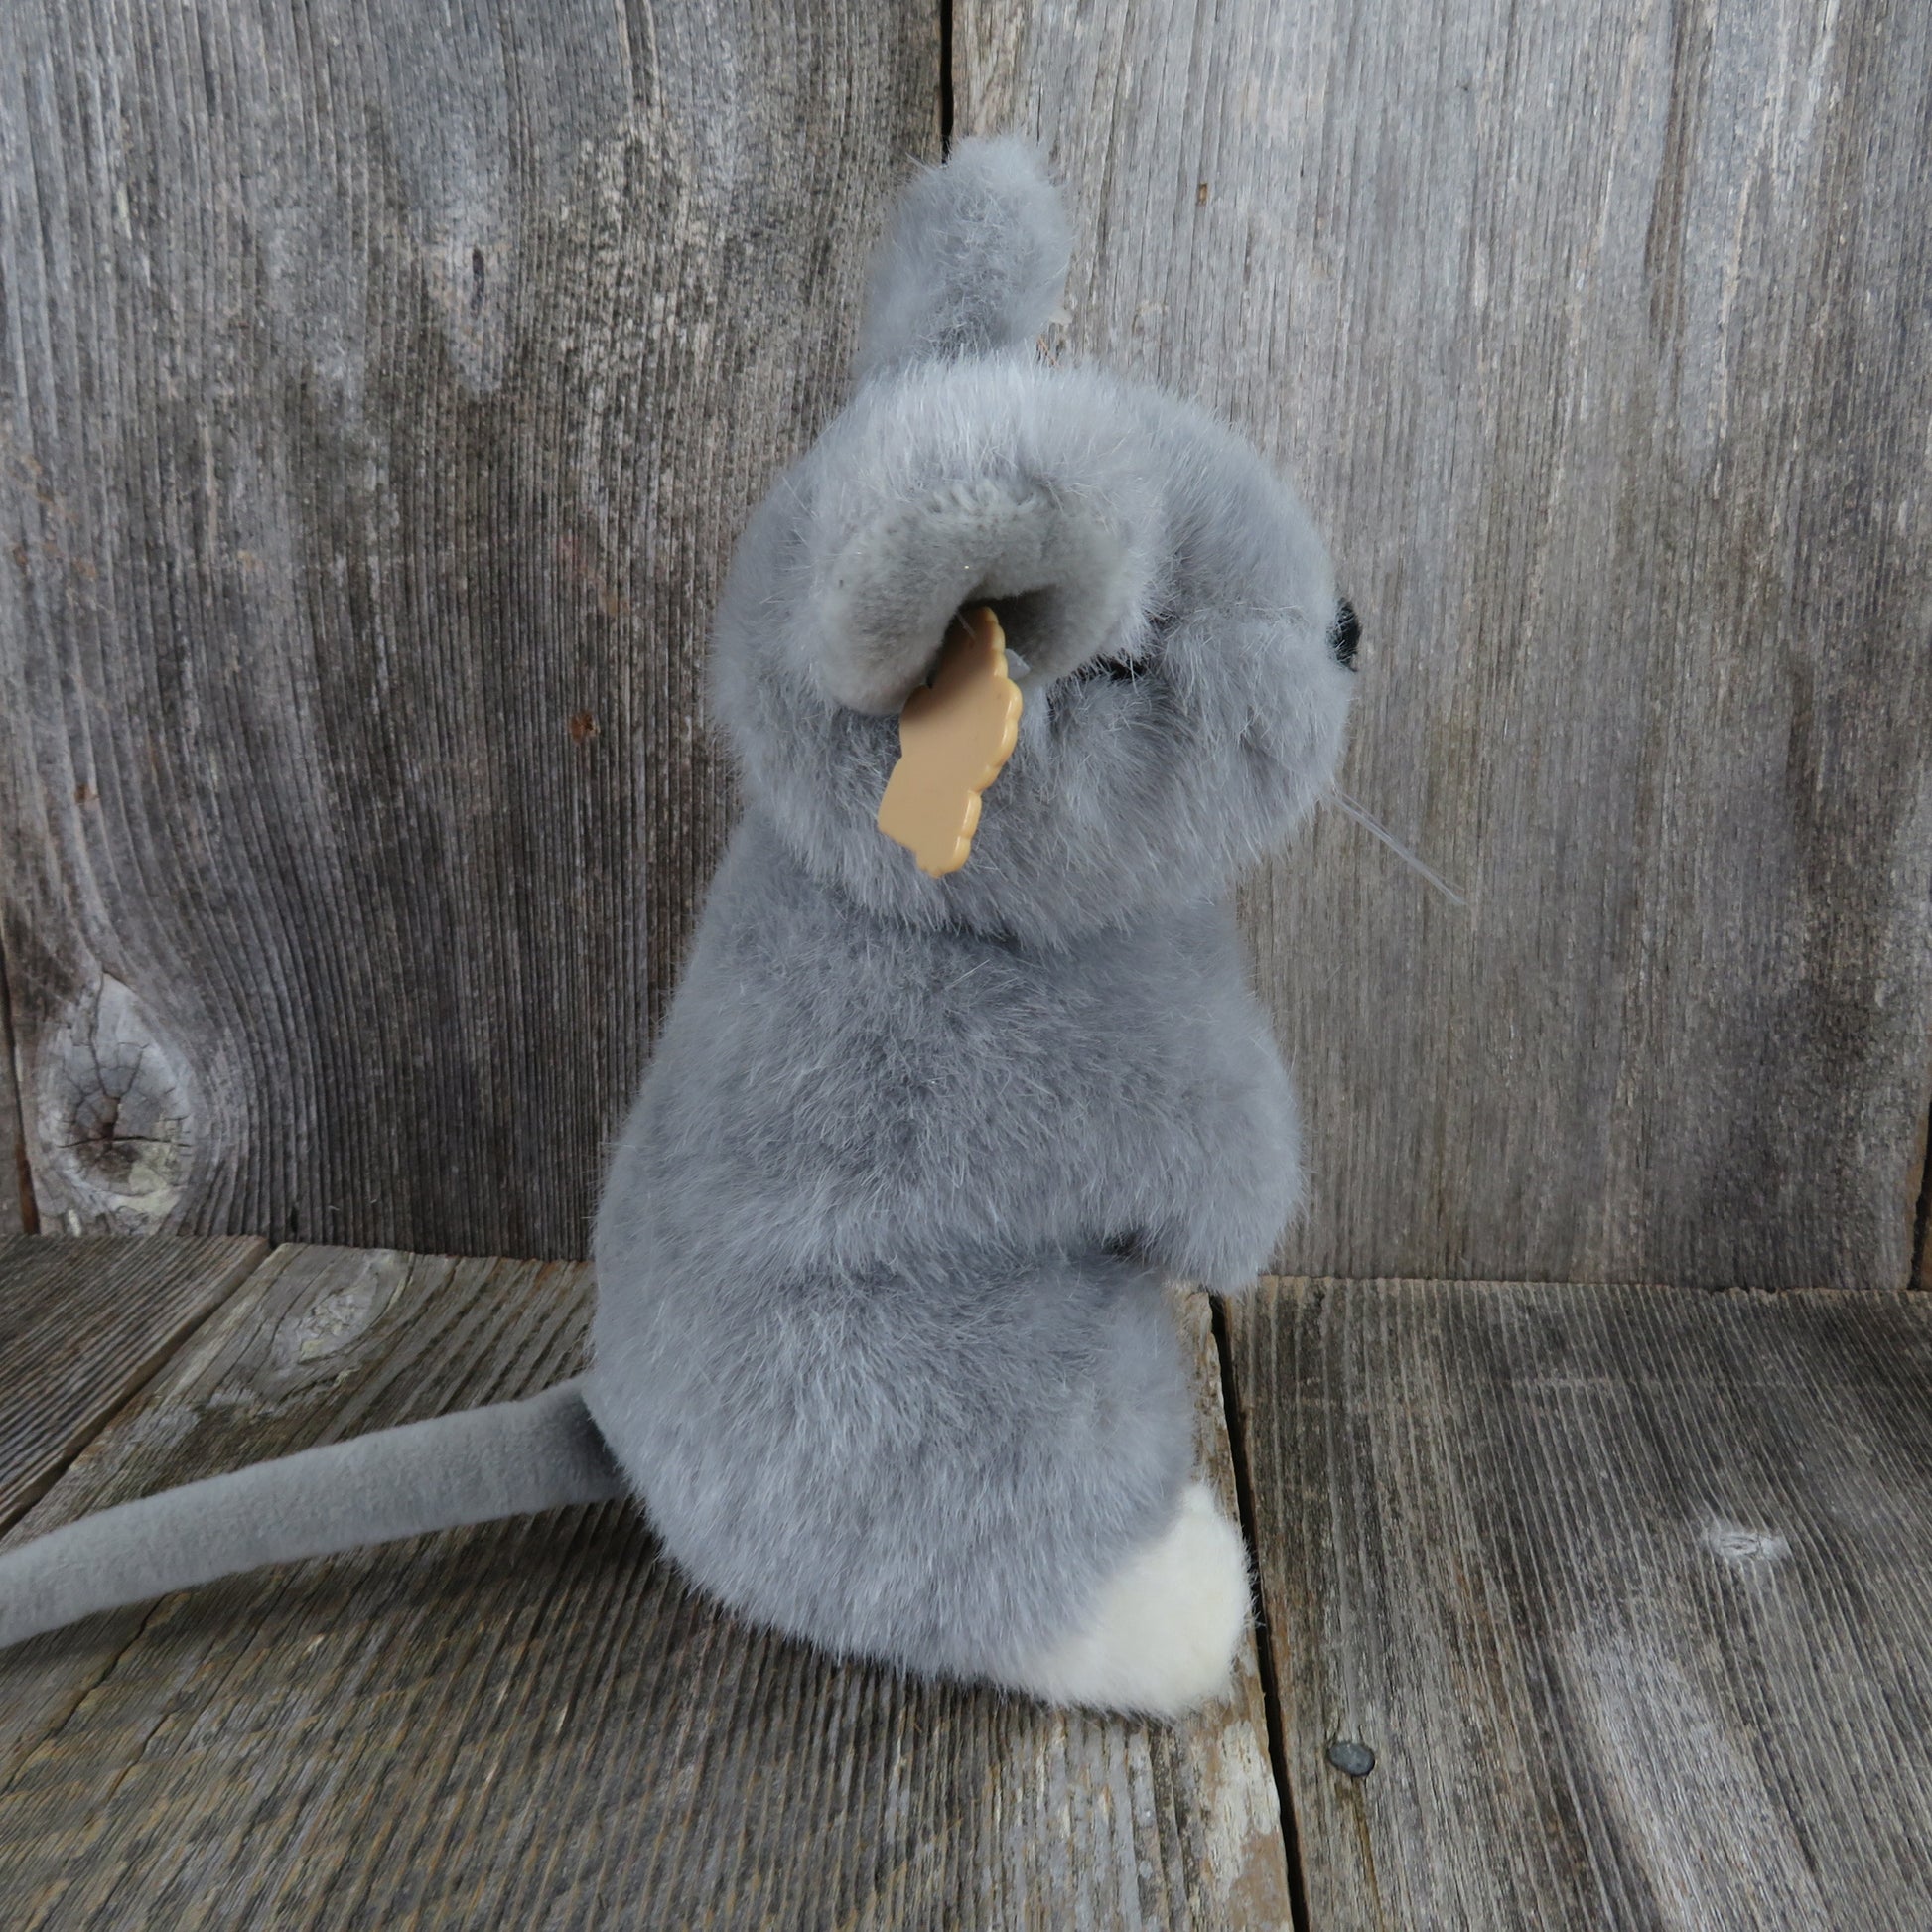 Vintage Mouse Plush Stuffed Animal Bravo Roquefort Toy Doll Grey 1988 Applause - At Grandma's Table